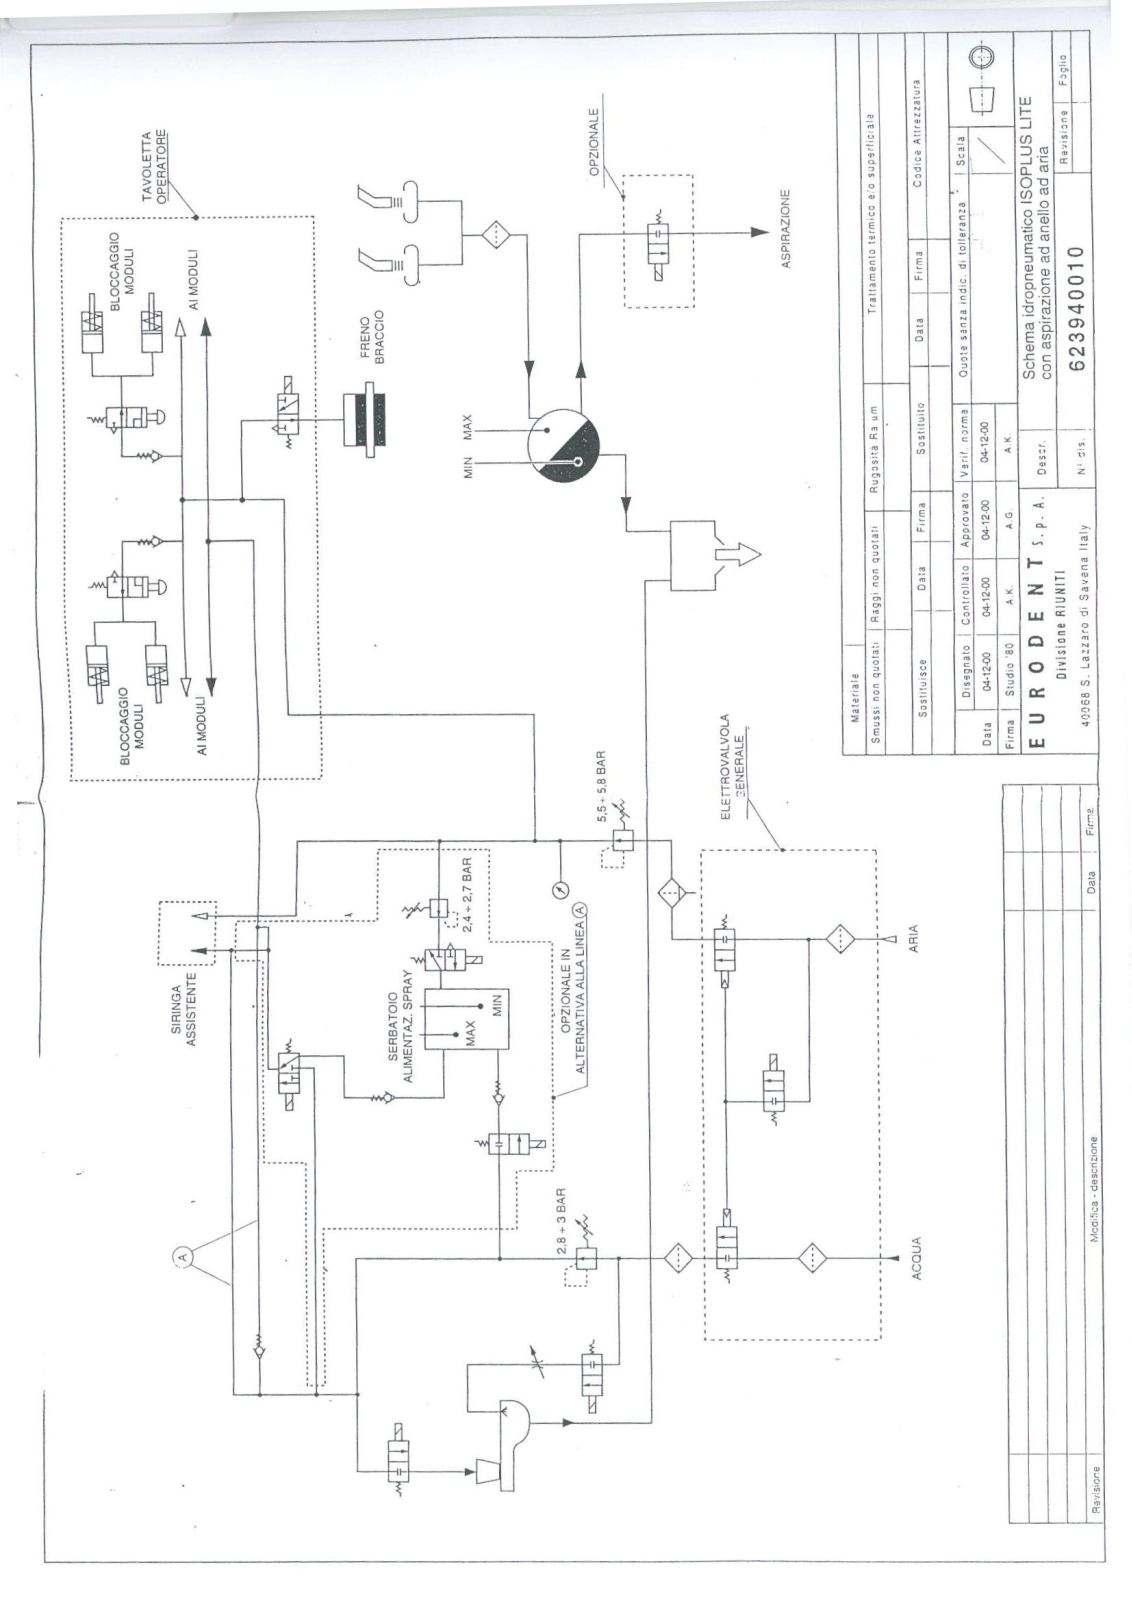 EURODENT Isoplus Lite Schematic Diagrams